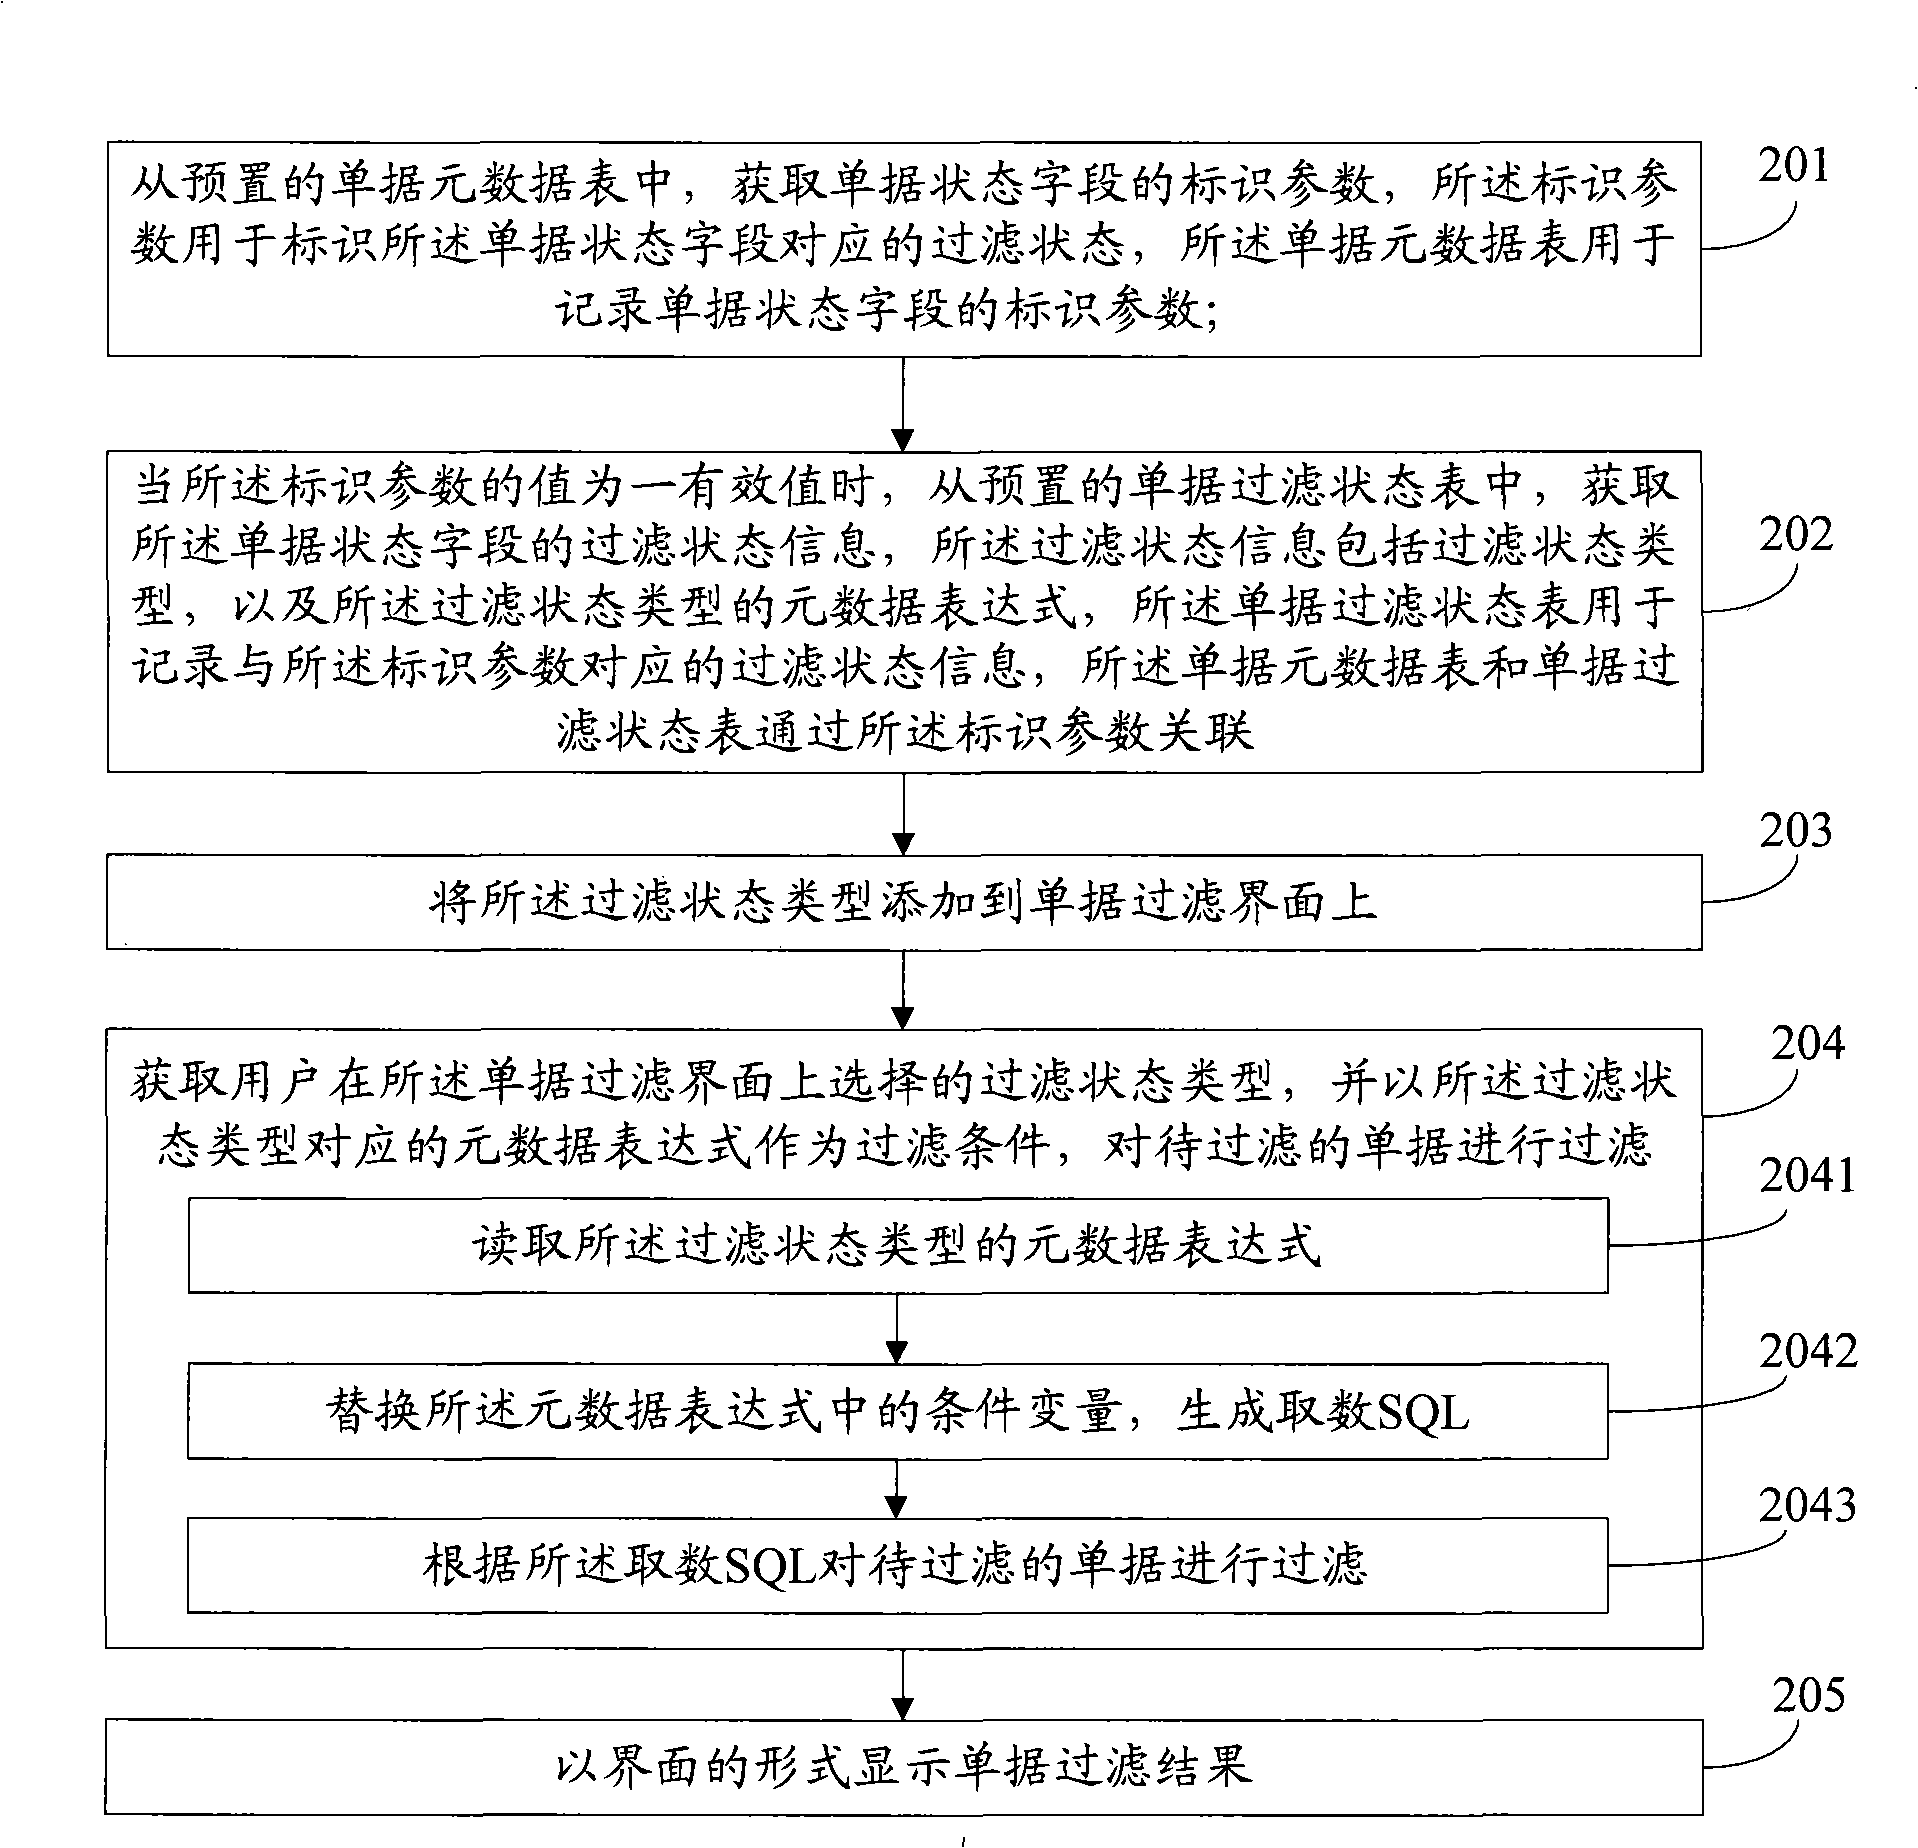 Method and apparatus for filtering documents according to documents state